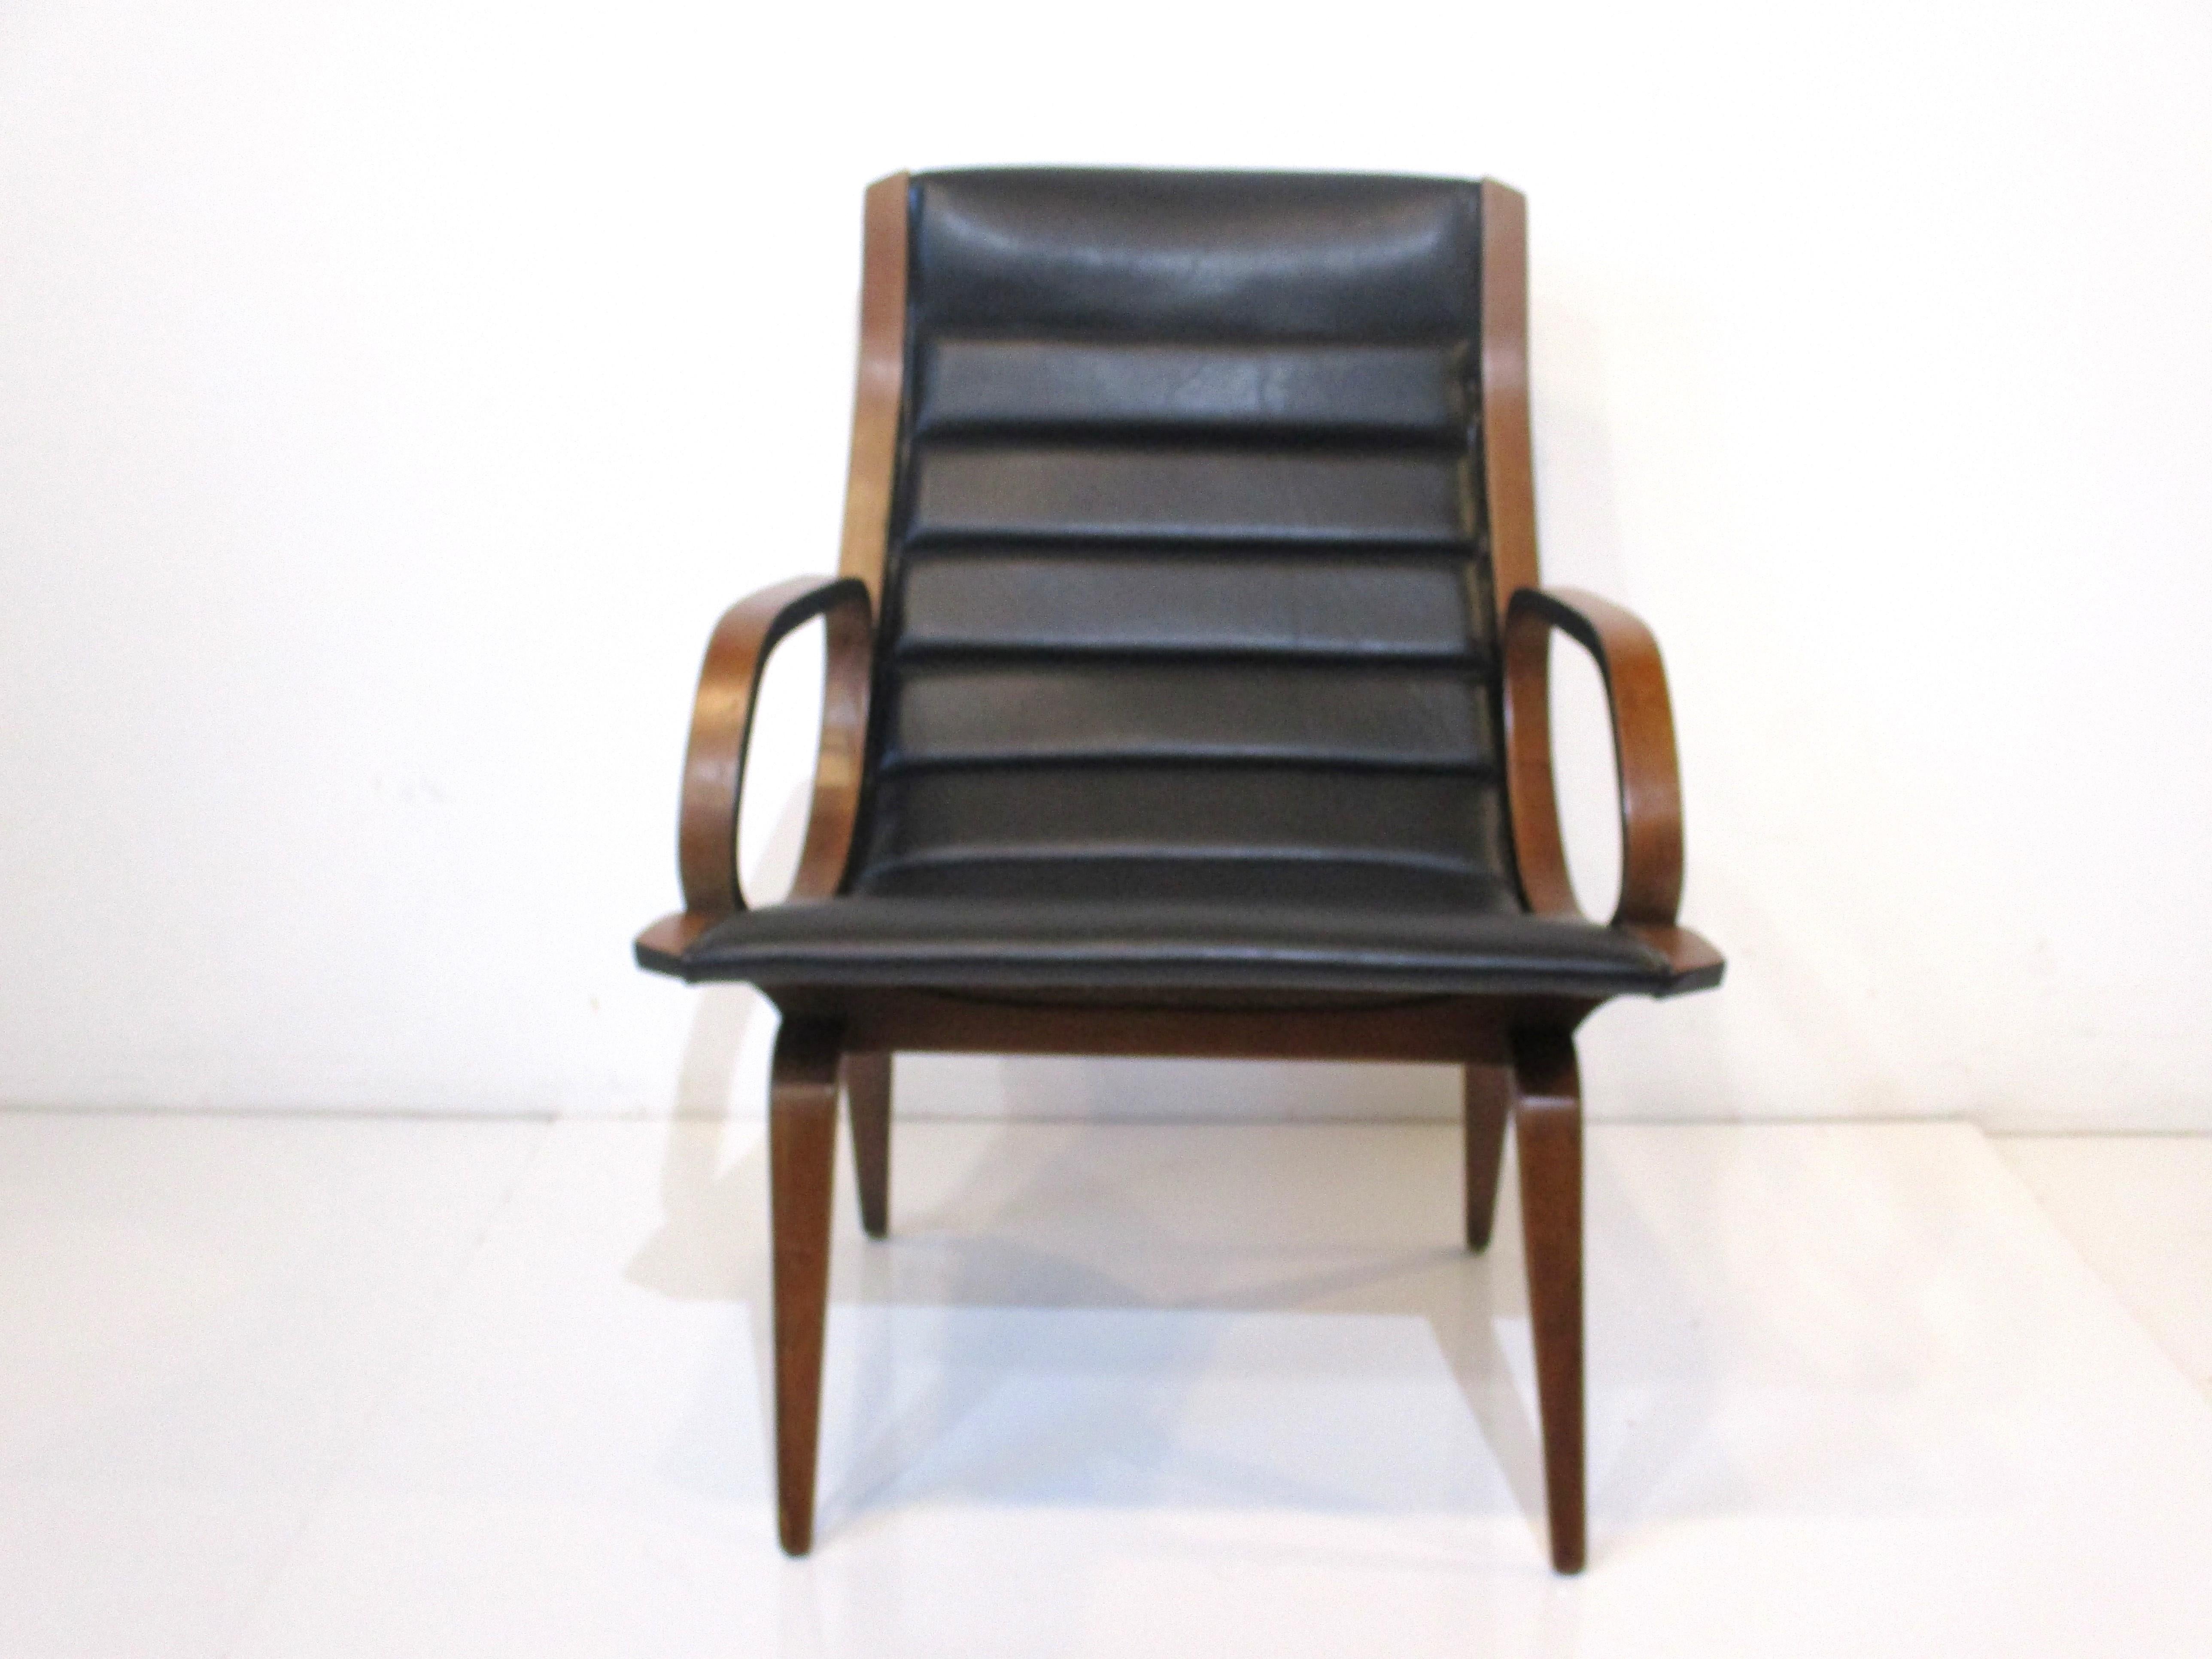 Rare Sculptural Arm / Lounge Chair by Norman Chener for Plycraft In Good Condition For Sale In Cincinnati, OH